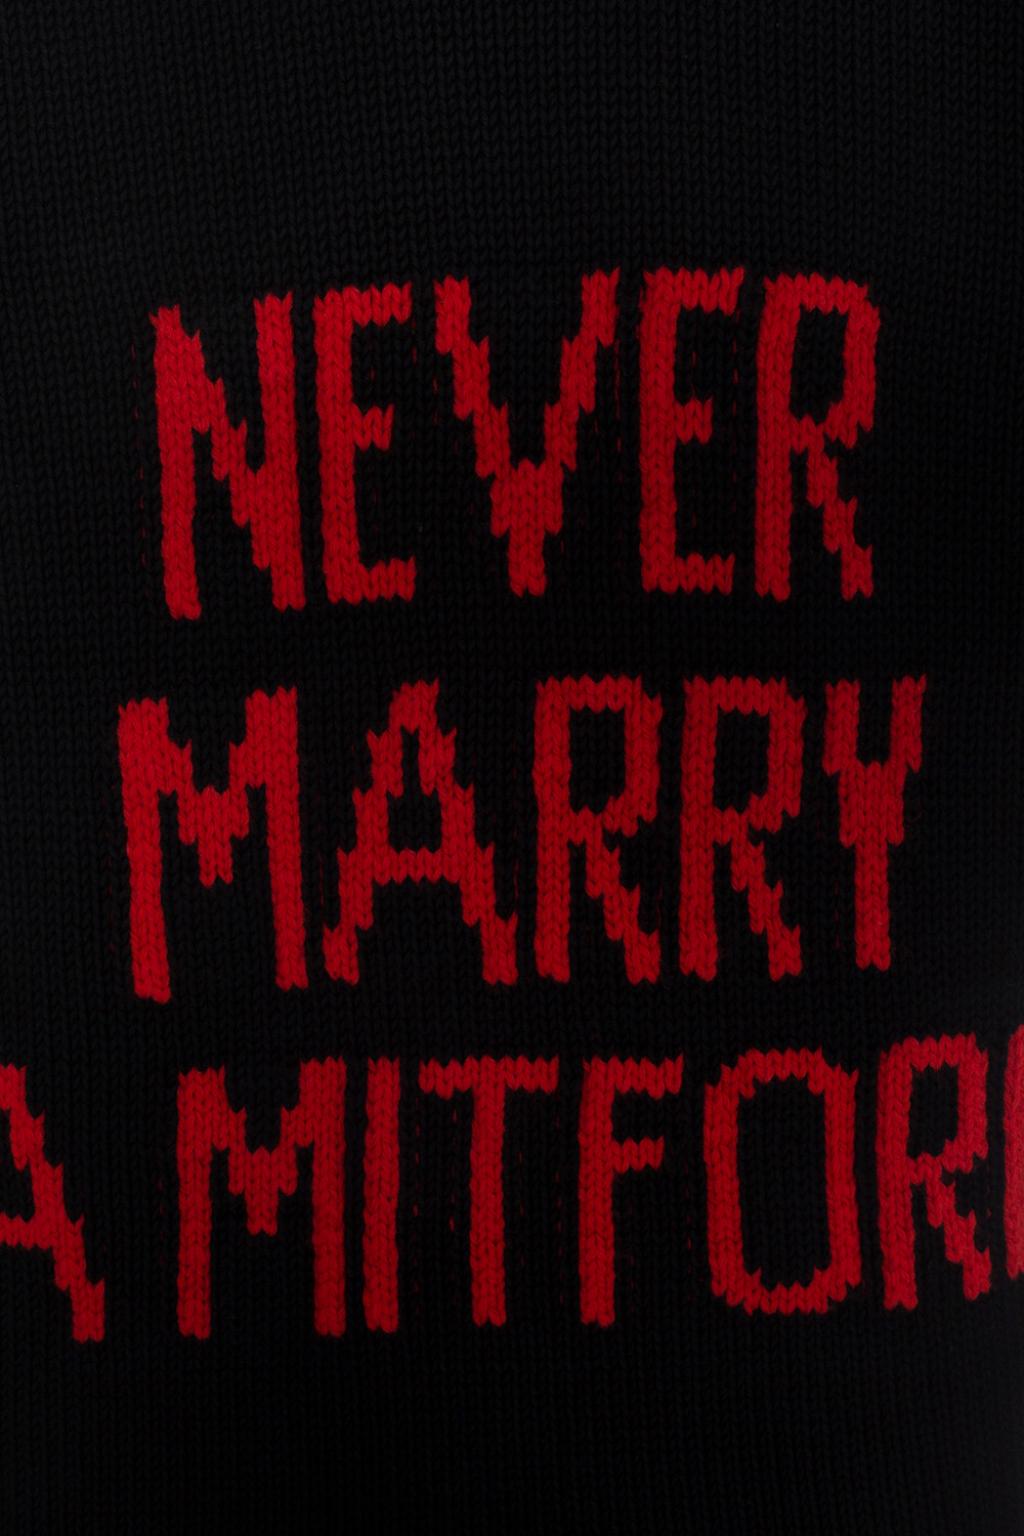 never marry a mitford sweater